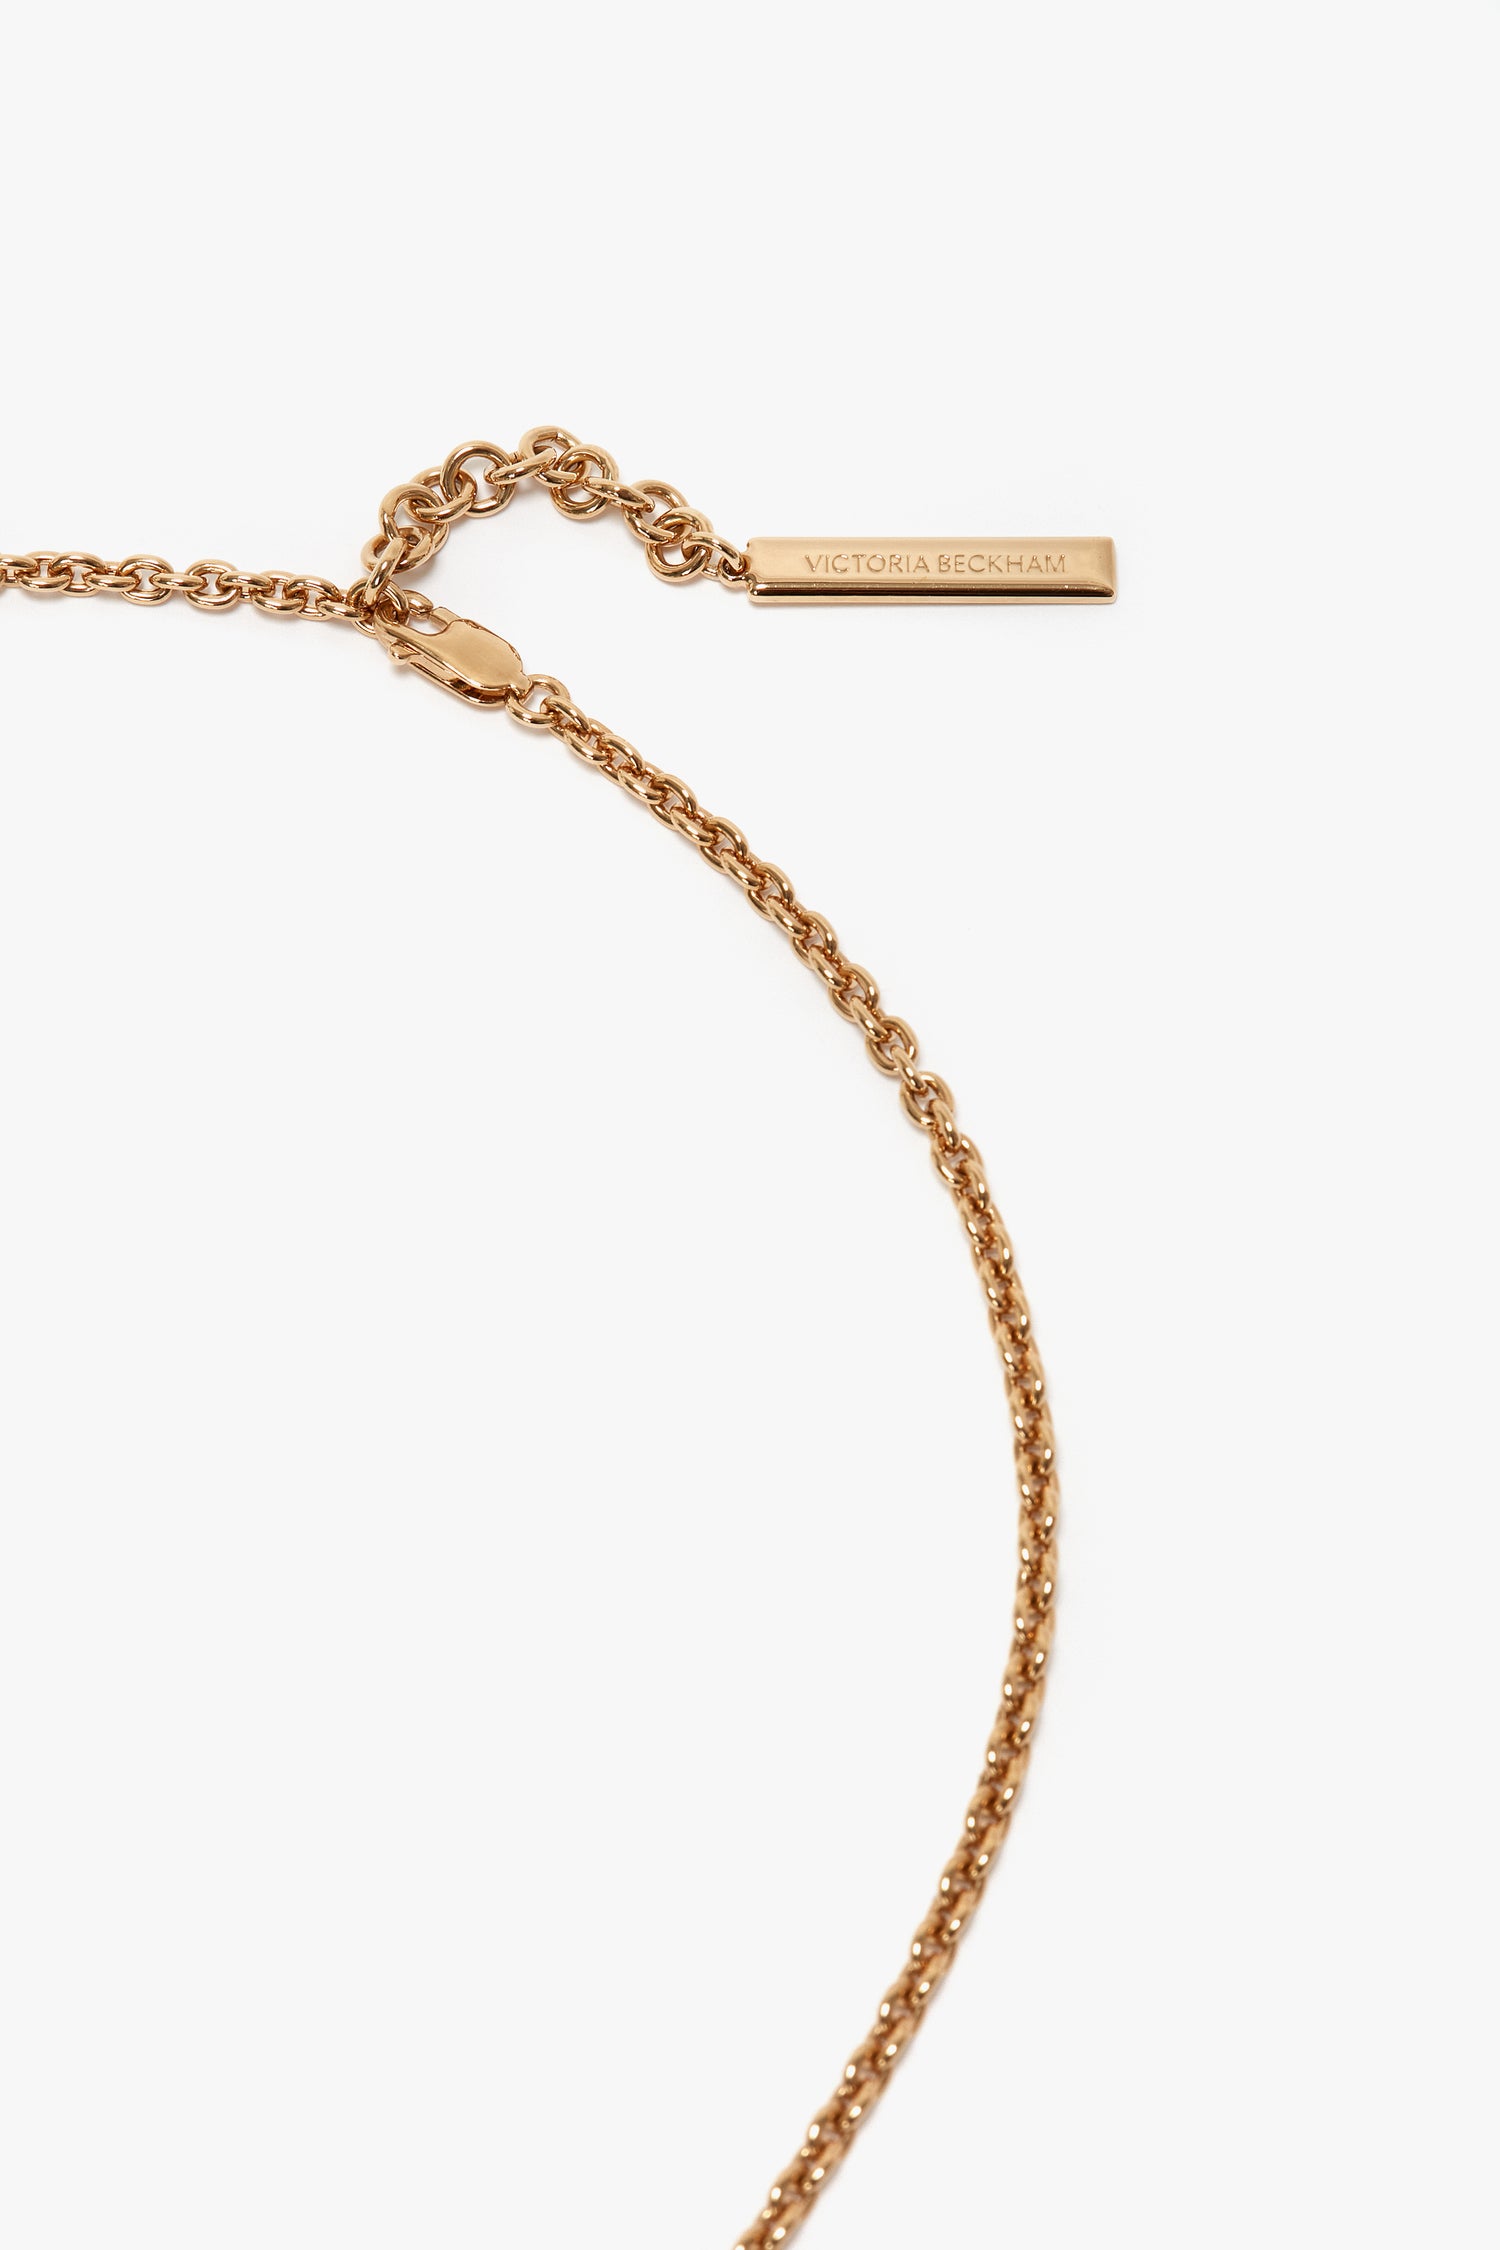 Close-up of a gold brushed brass chain necklace with a small rectangular tag that reads "Victoria Beckham." The chain is secured with a round clasp, showcasing distinct Victoria Beckham branding.